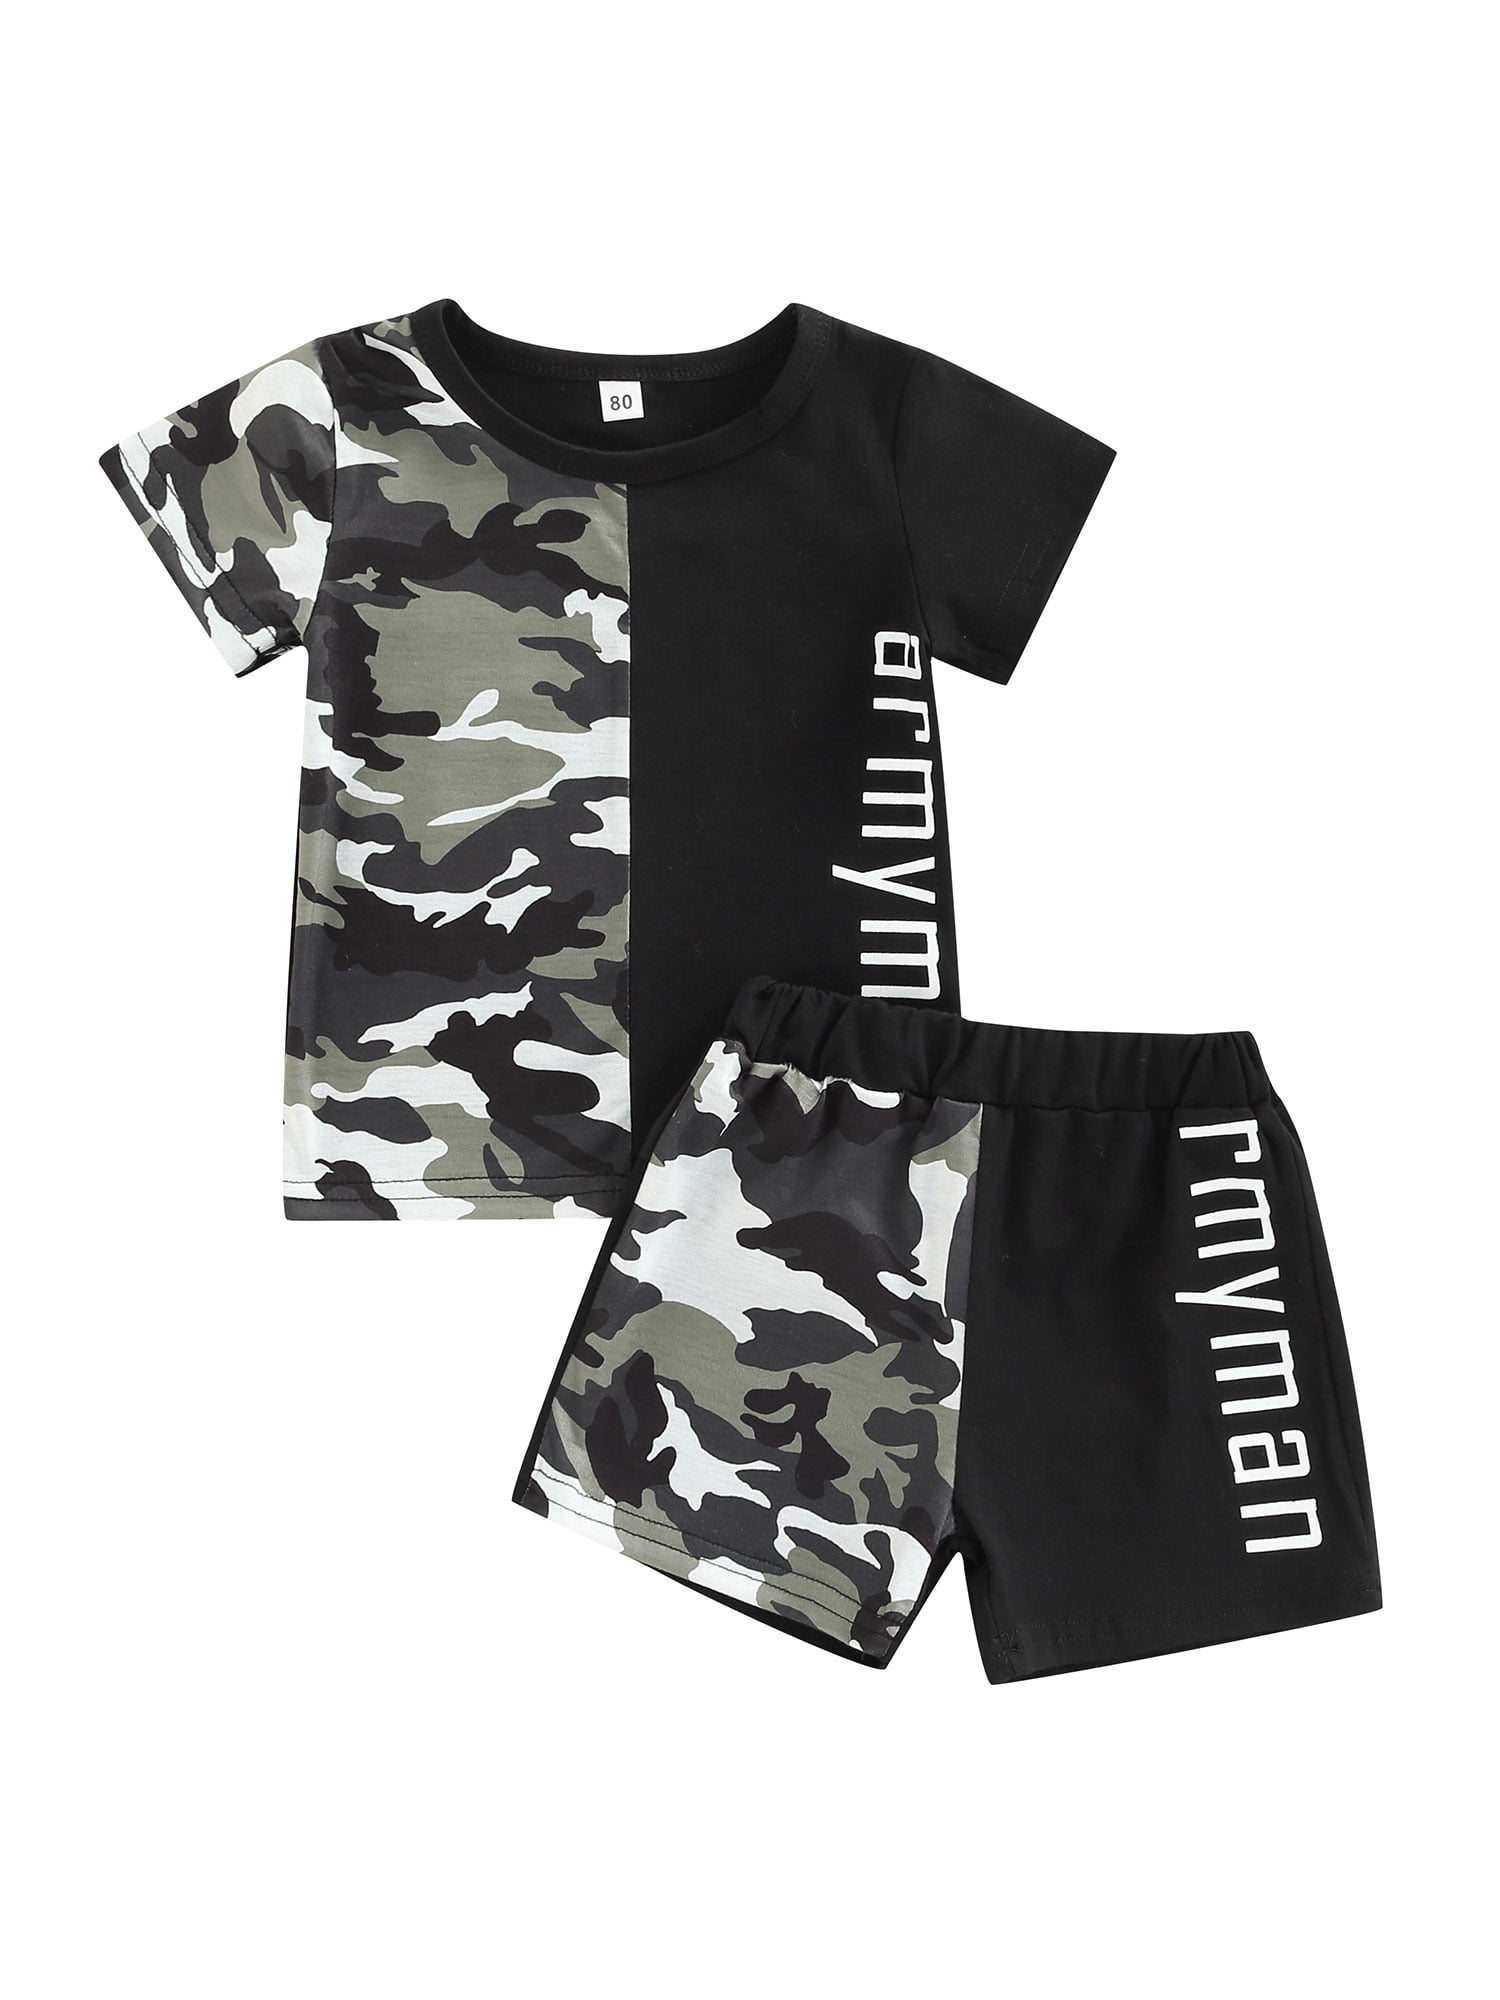 Toddler Baby Boys Letters T-Shirt Tops & Camouflage Pants Tracksuit Outfits Set 